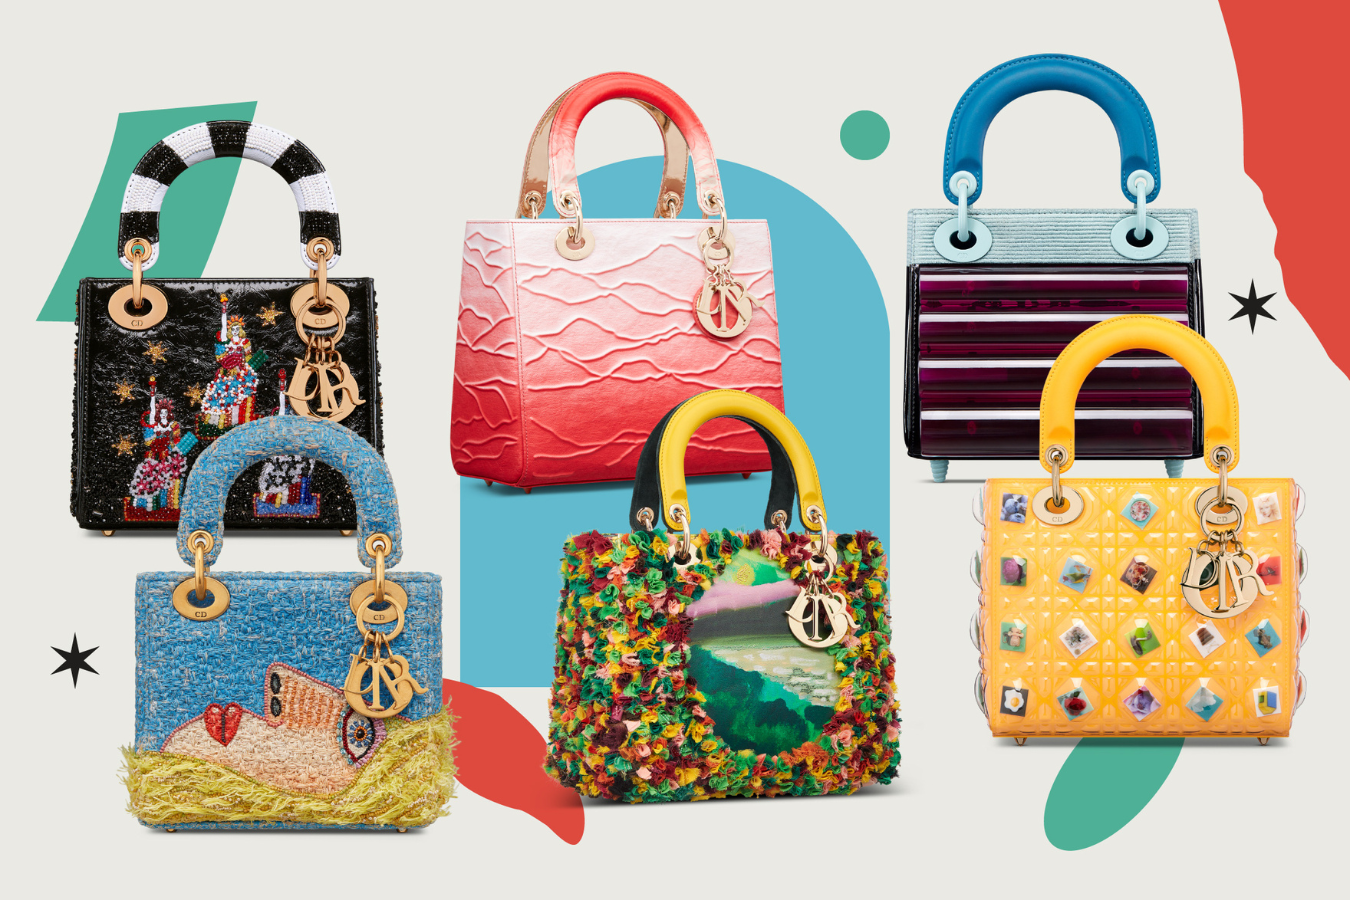 Global Artists Recreate Iconic Lady Dior Bag For Dior Lady Art 4